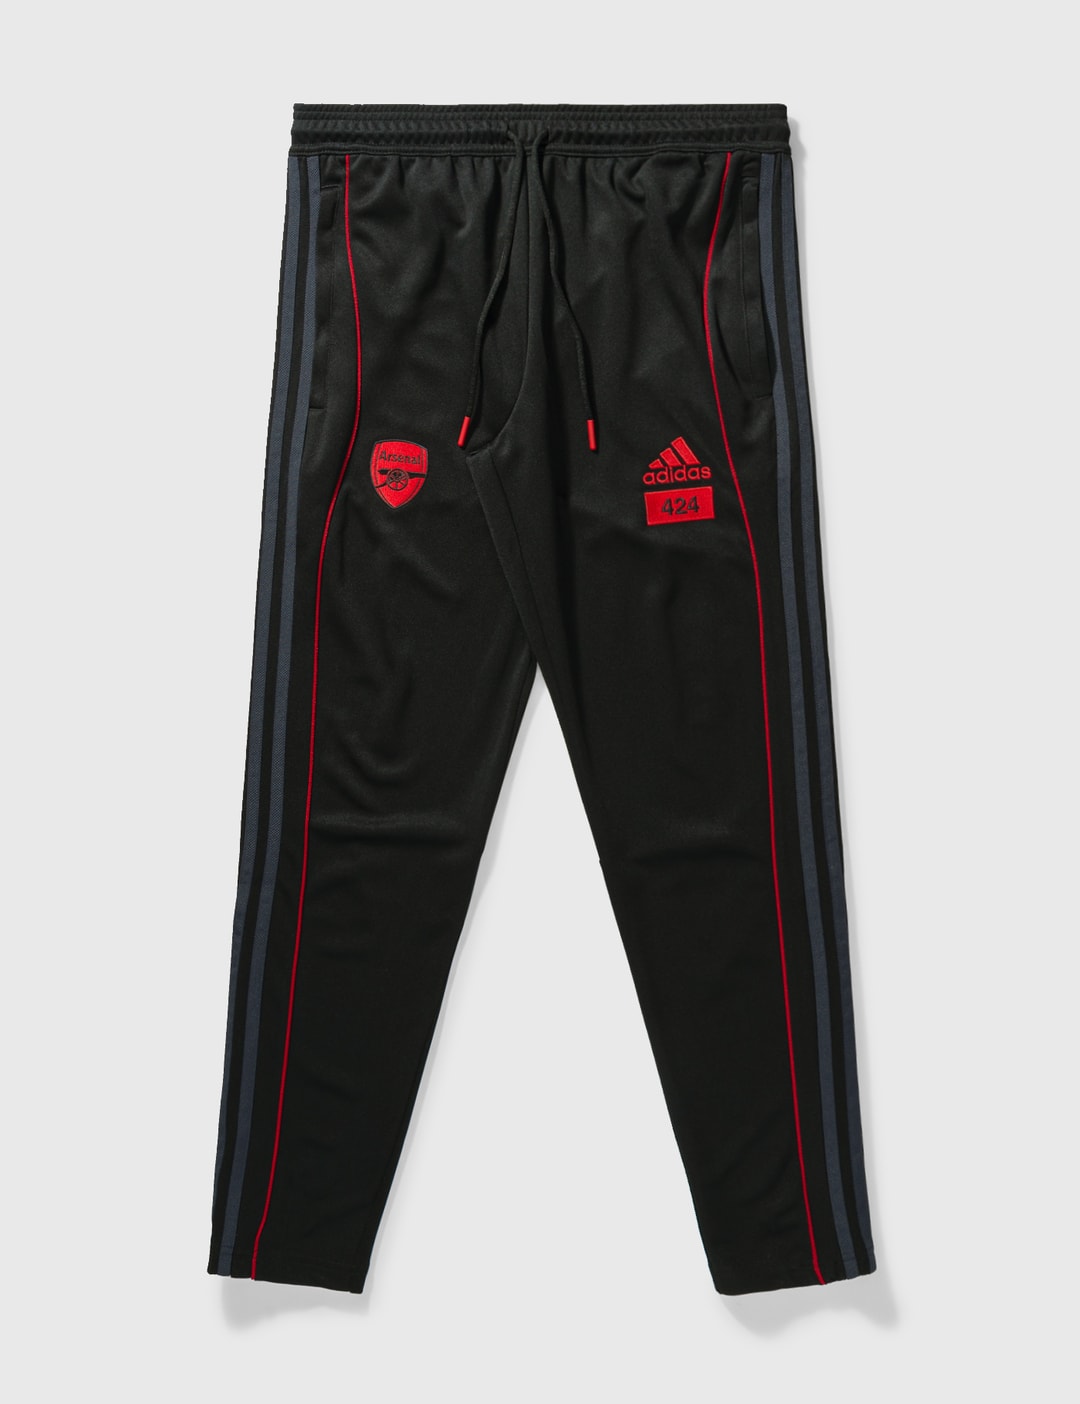 Go down phone Astonishment Adidas Originals - ARSENAL FC X 424 X Adidas Consortium Pants | HBX -  Globally Curated Fashion and Lifestyle by Hypebeast